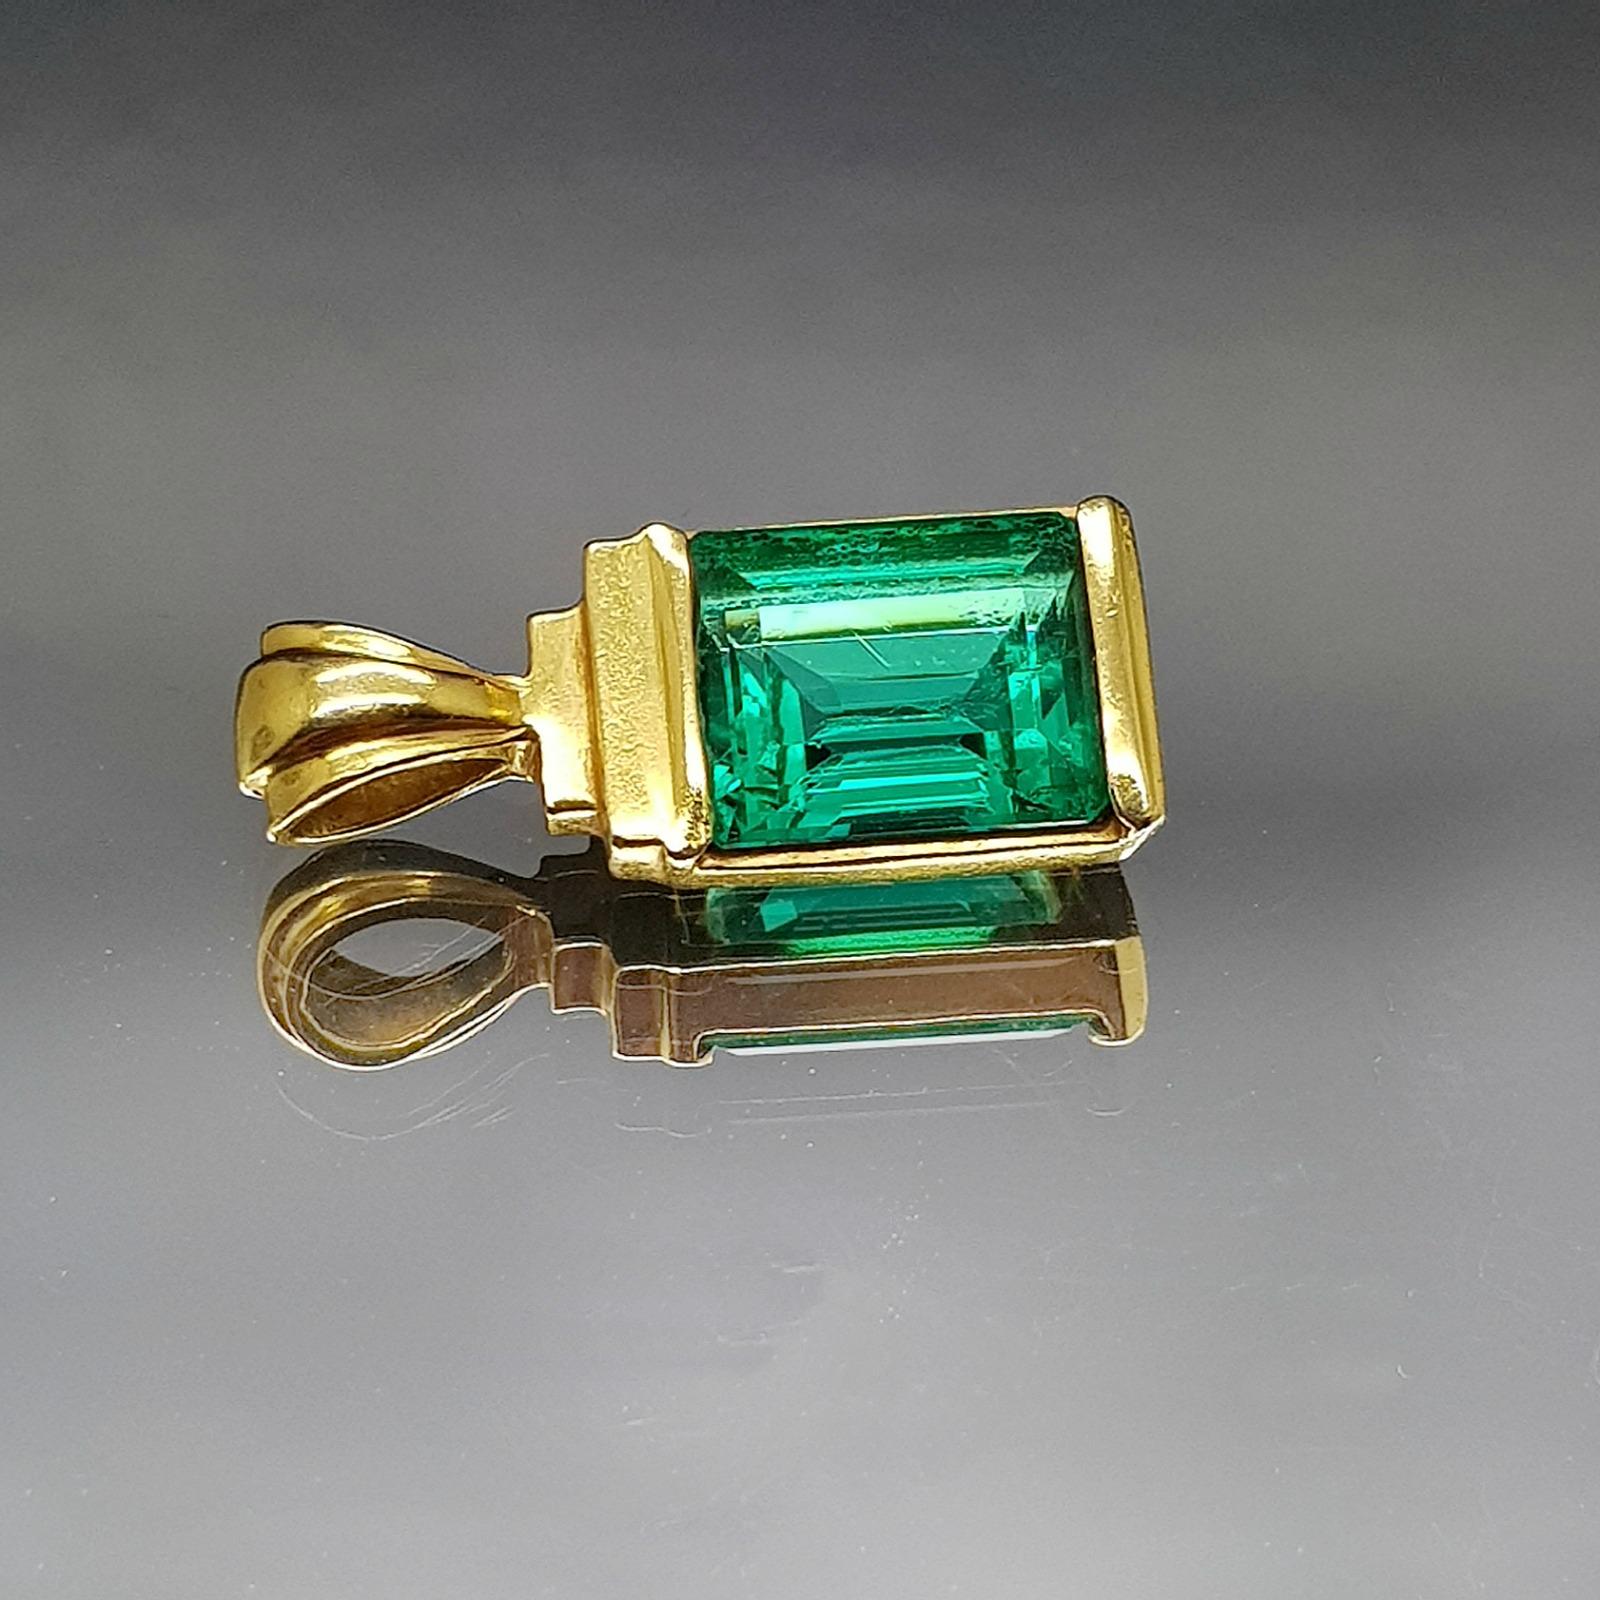 GIA Certified 4.23cts. Emerald cut Emerald set in 18k yellow gold
 Specifications:

    product id: GG2011
    gem type: NATURAL EMERALD
    shape: EMERALD
    weight: 4.23 CT
    size: 10.20 X 8.98 X 6.01 mm
    QUANTITY: 1
    color: GREEN
   